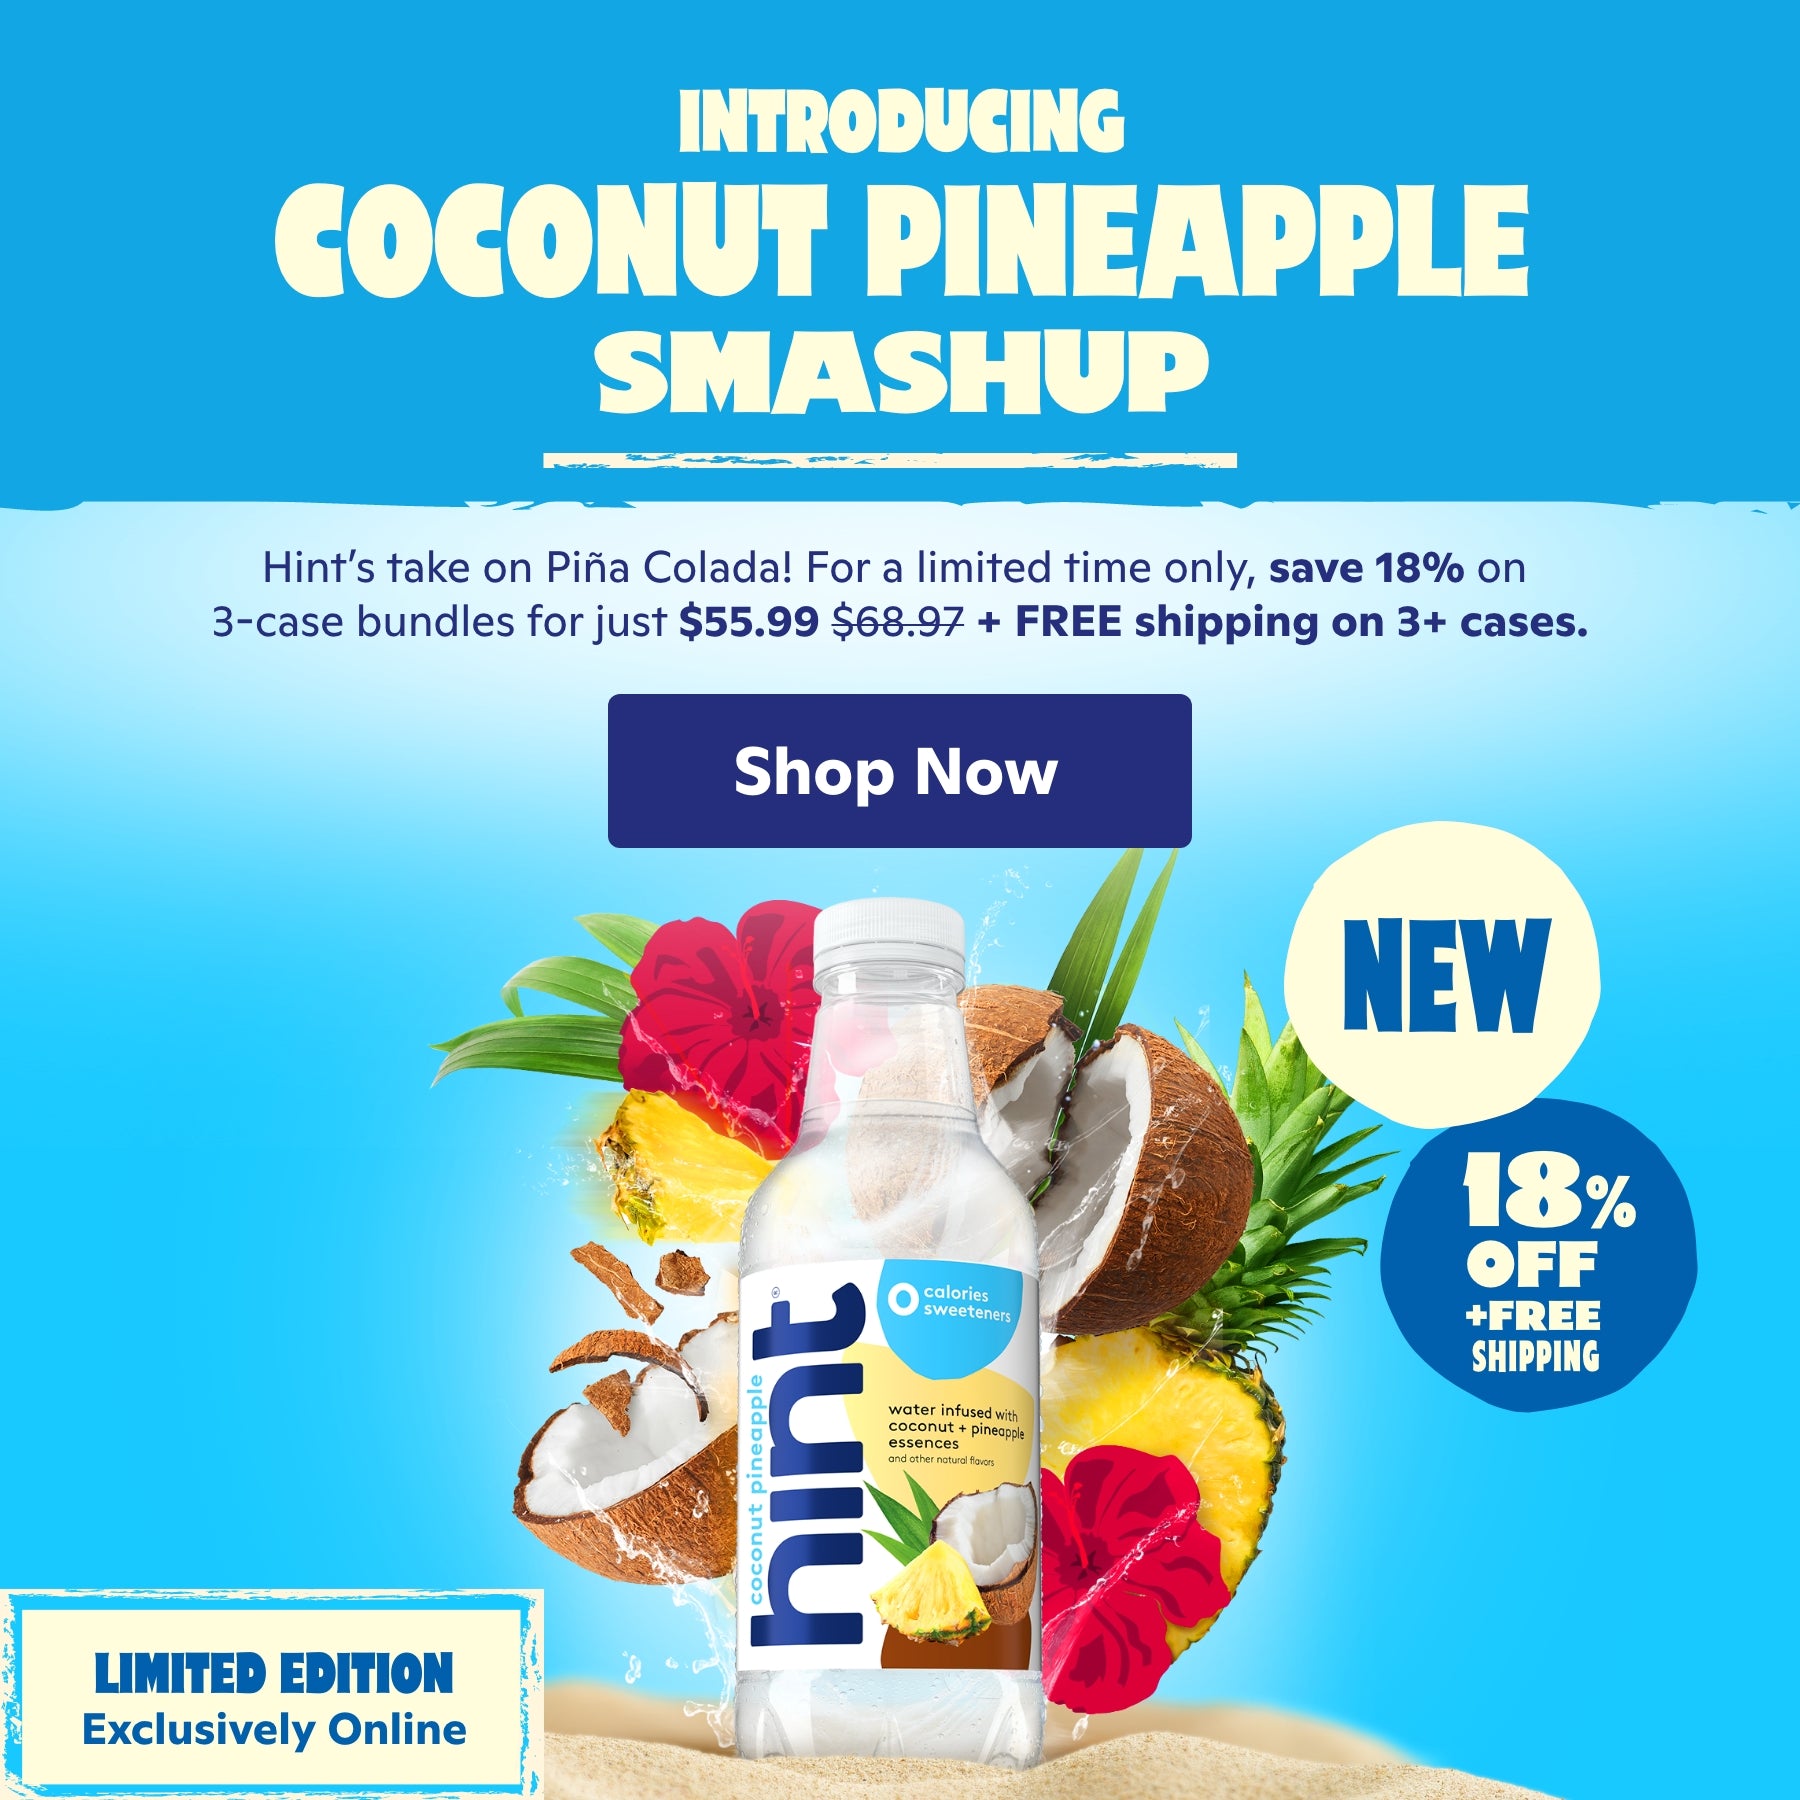 Introducing Coconut Pineapple Smashup <br> Hint's take on Piña Colada! For a limited time only, save 18% on 3-case bundles for just $55.99+ FREE shipping on 3+ cases. <br> Shop Now